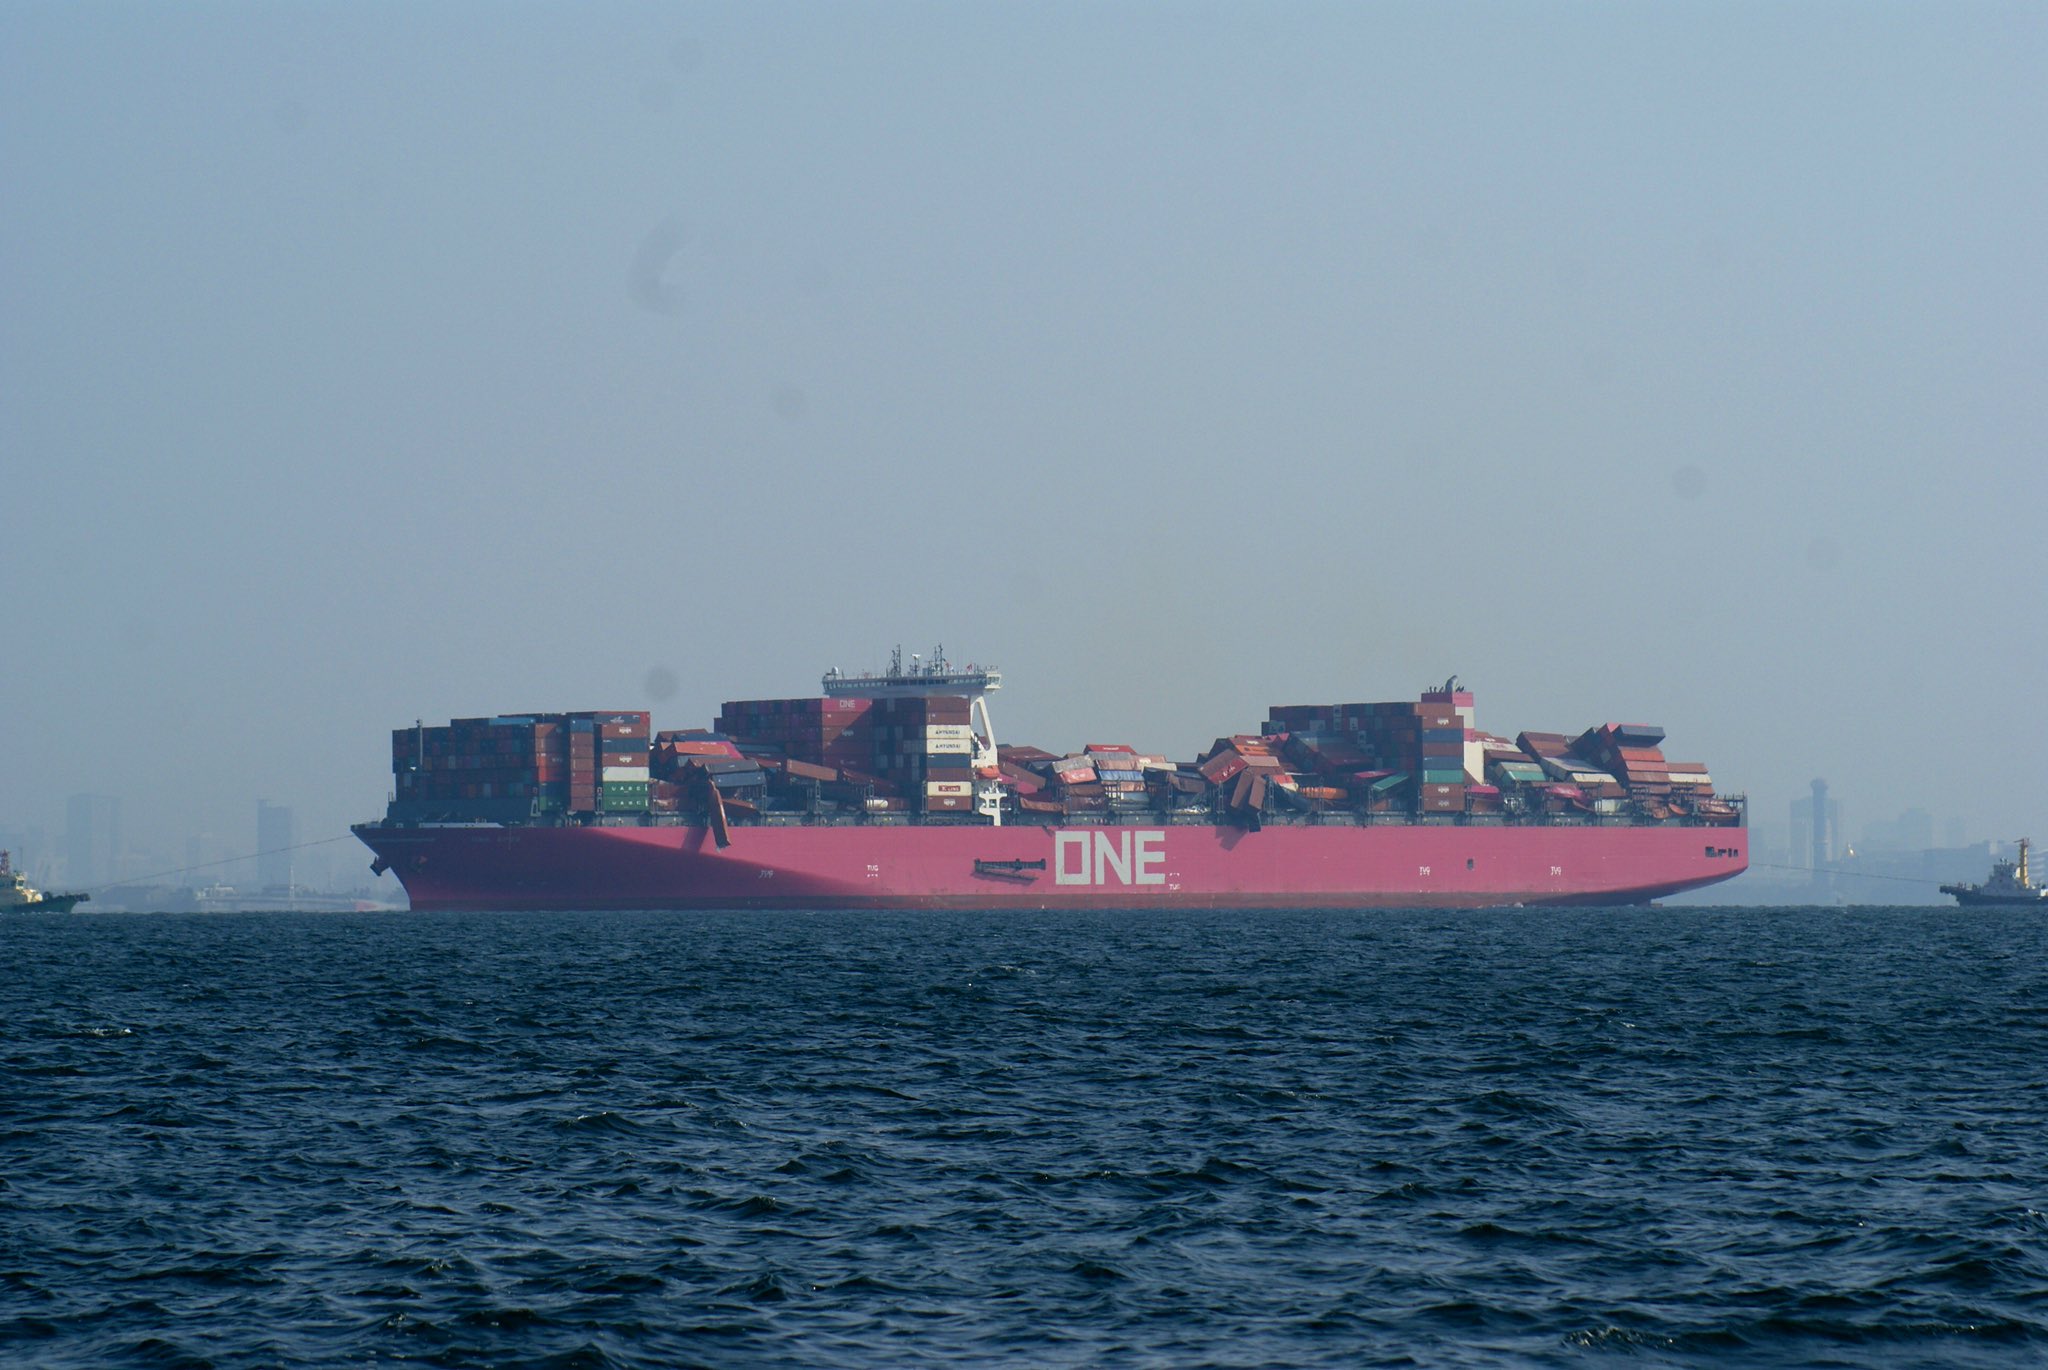 ONE Apus Update: Photos Show Cargo Carnage as Containership Arrives in Kobe